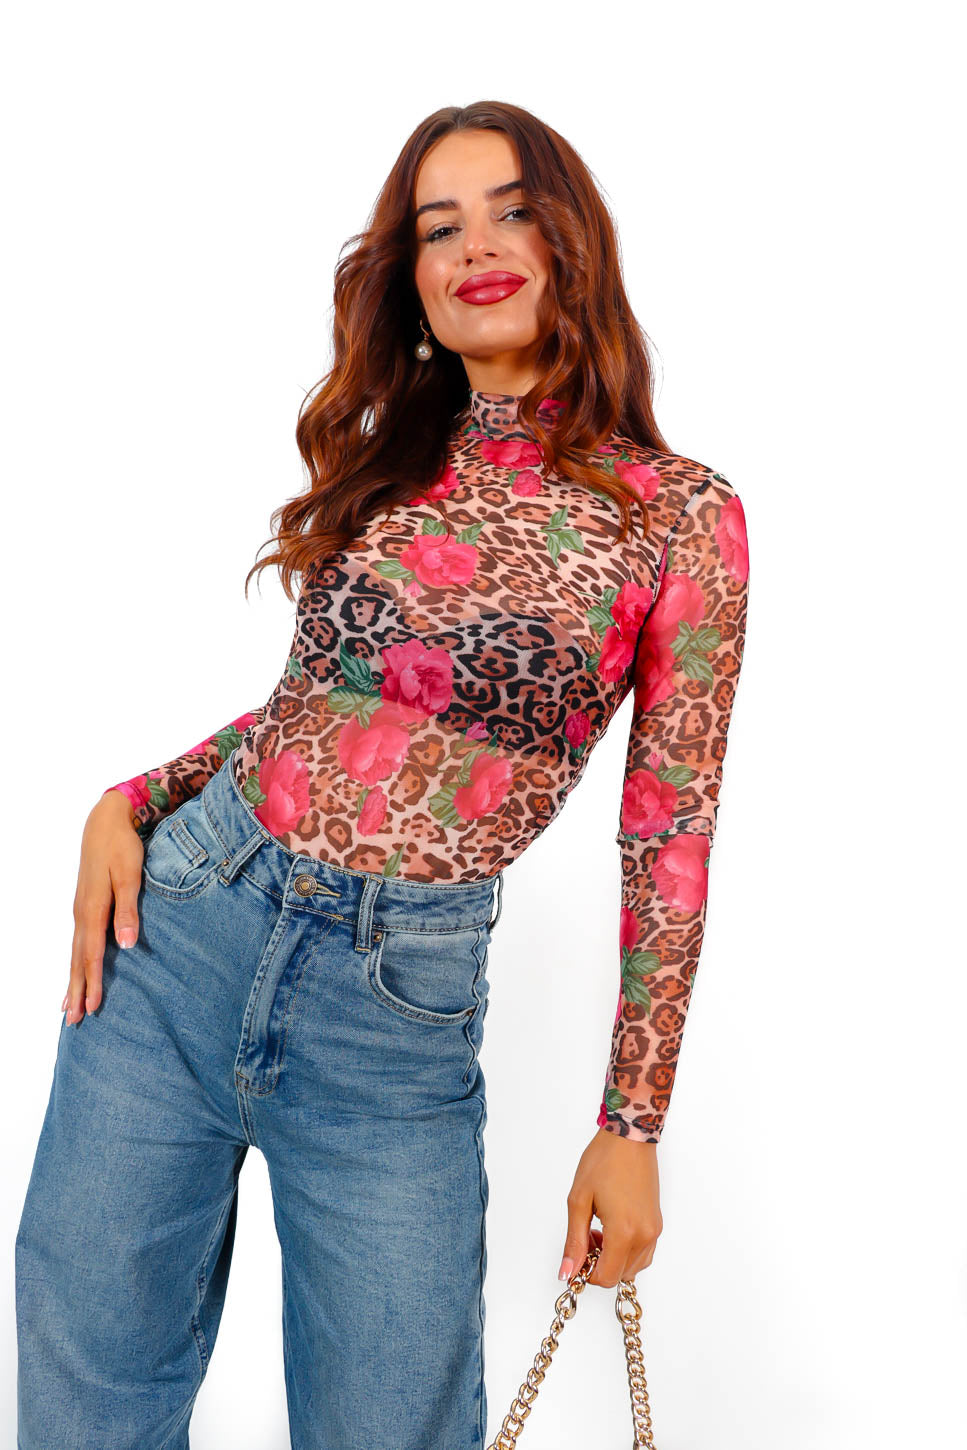 Its Sheer Luck - Pink Red Heart Print Mesh Top